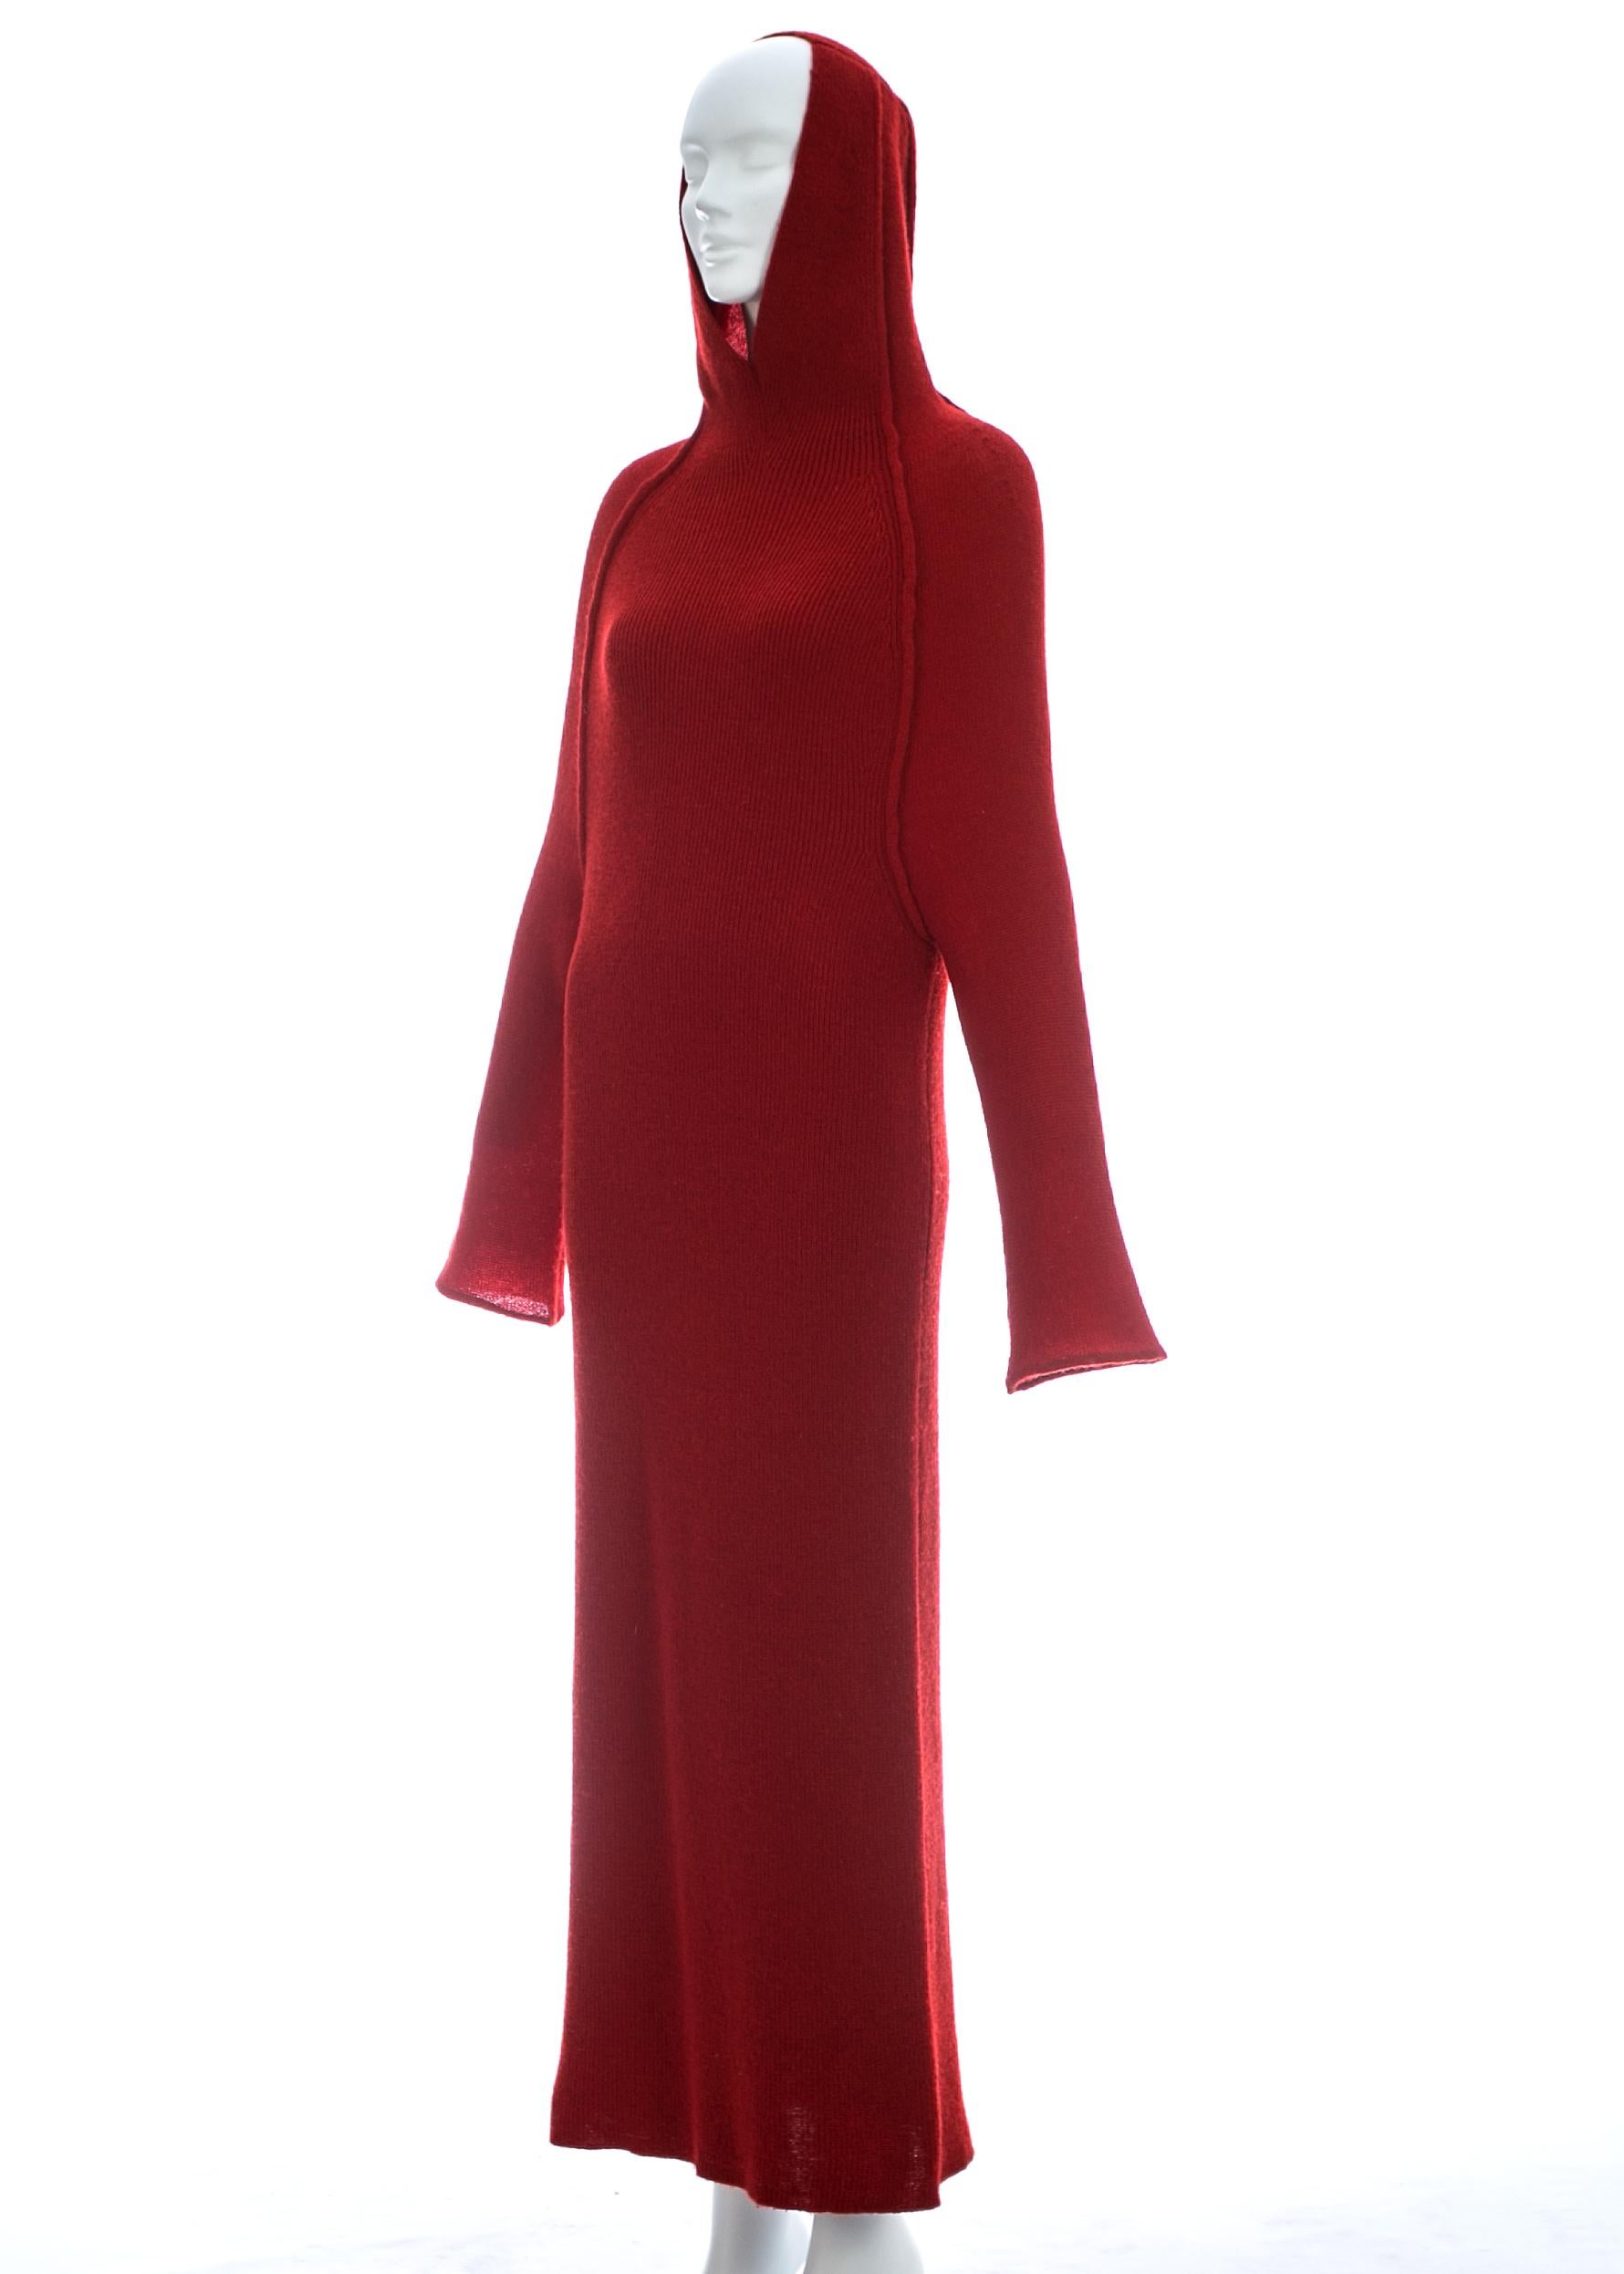 Women's or Men's Yohji Yamamoto red wool hooded knitted maxi dress, c. 1990s For Sale